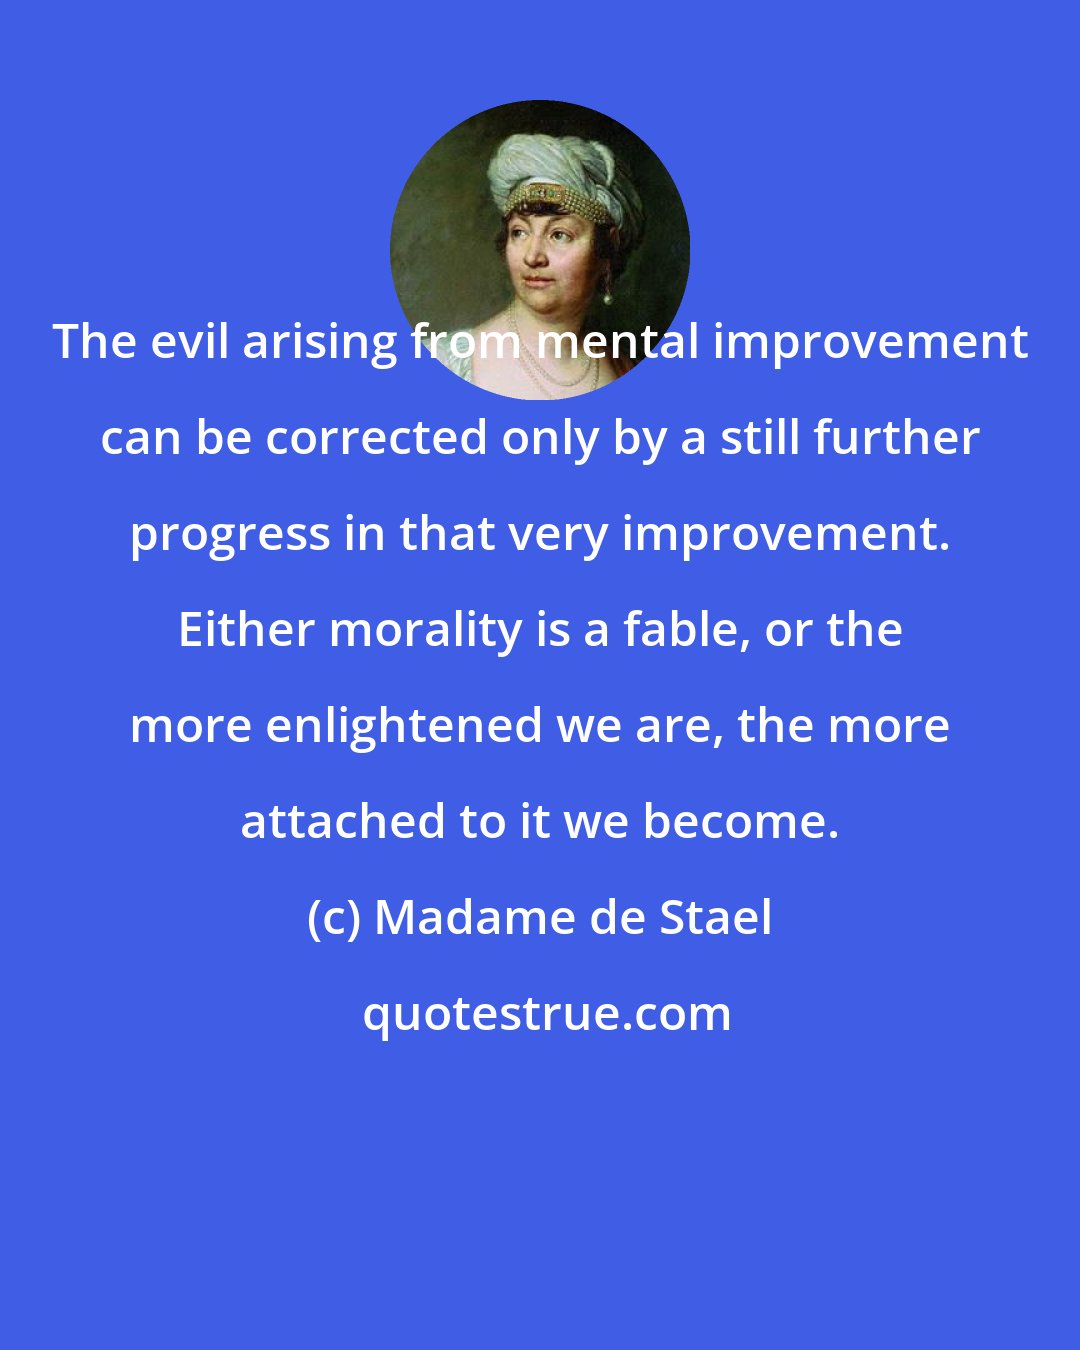 Madame de Stael: The evil arising from mental improvement can be corrected only by a still further progress in that very improvement. Either morality is a fable, or the more enlightened we are, the more attached to it we become.